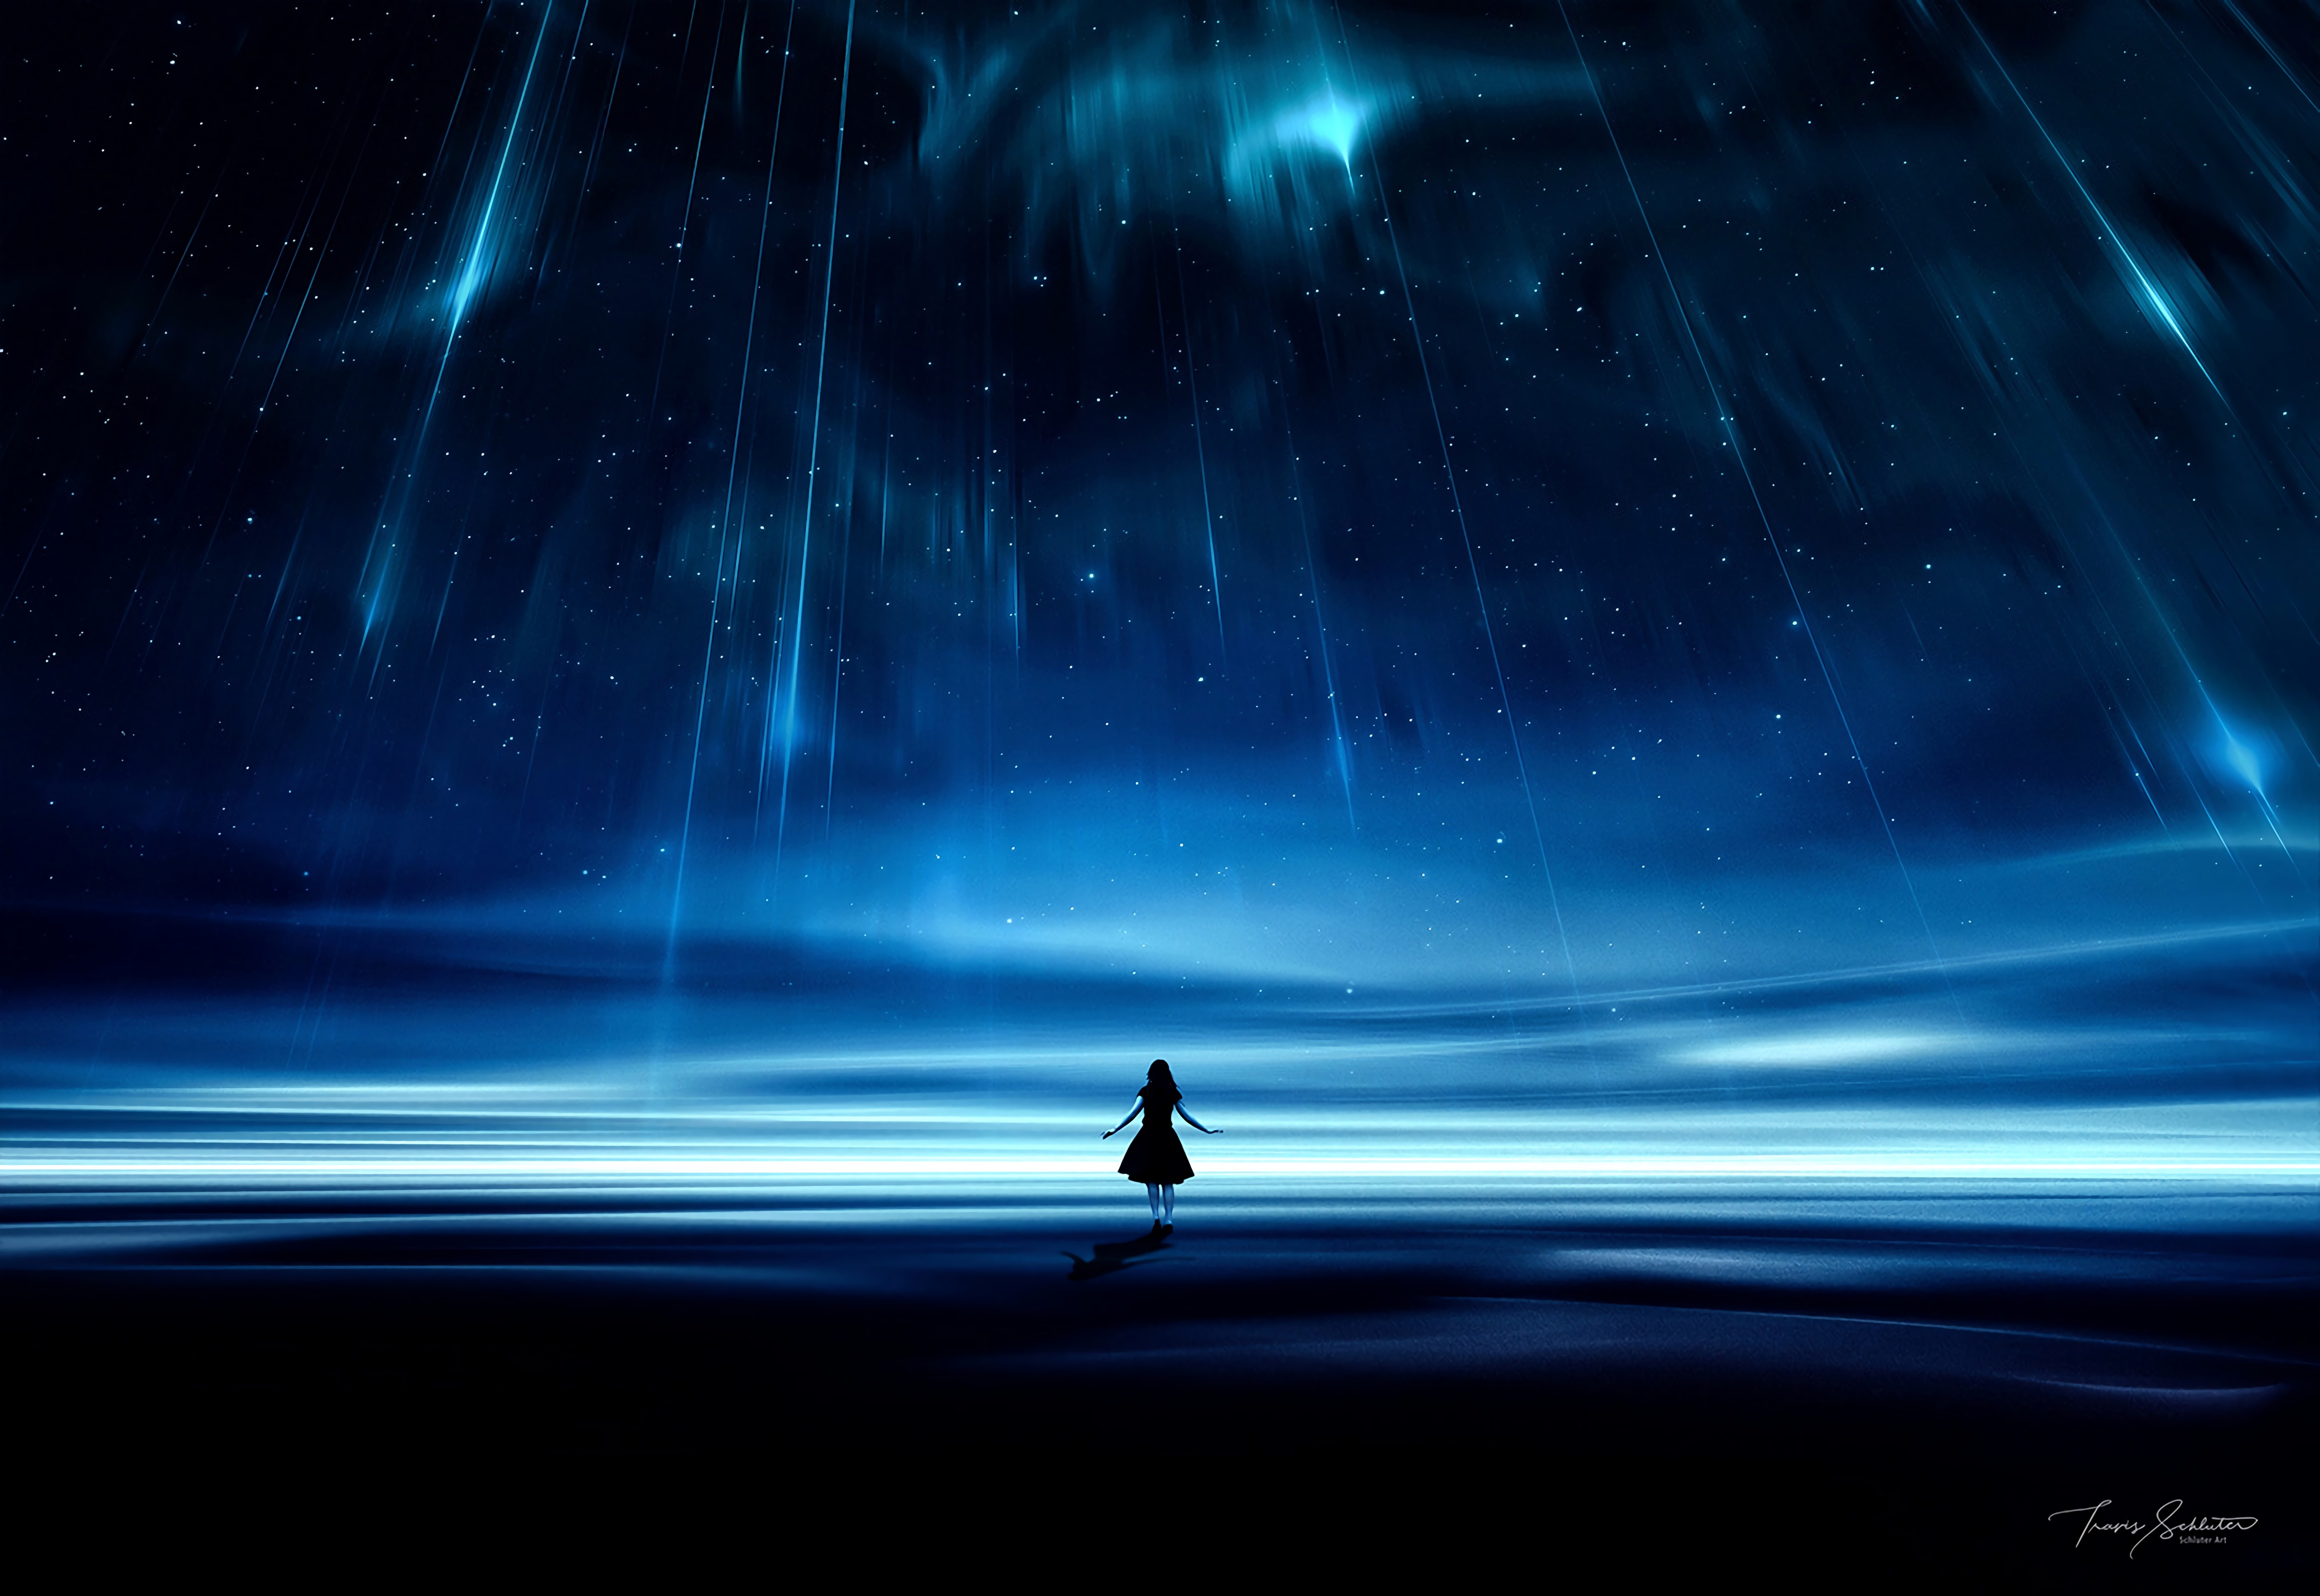 152954 download wallpaper starry sky, dark, night, shining, silhouette screensavers and pictures for free